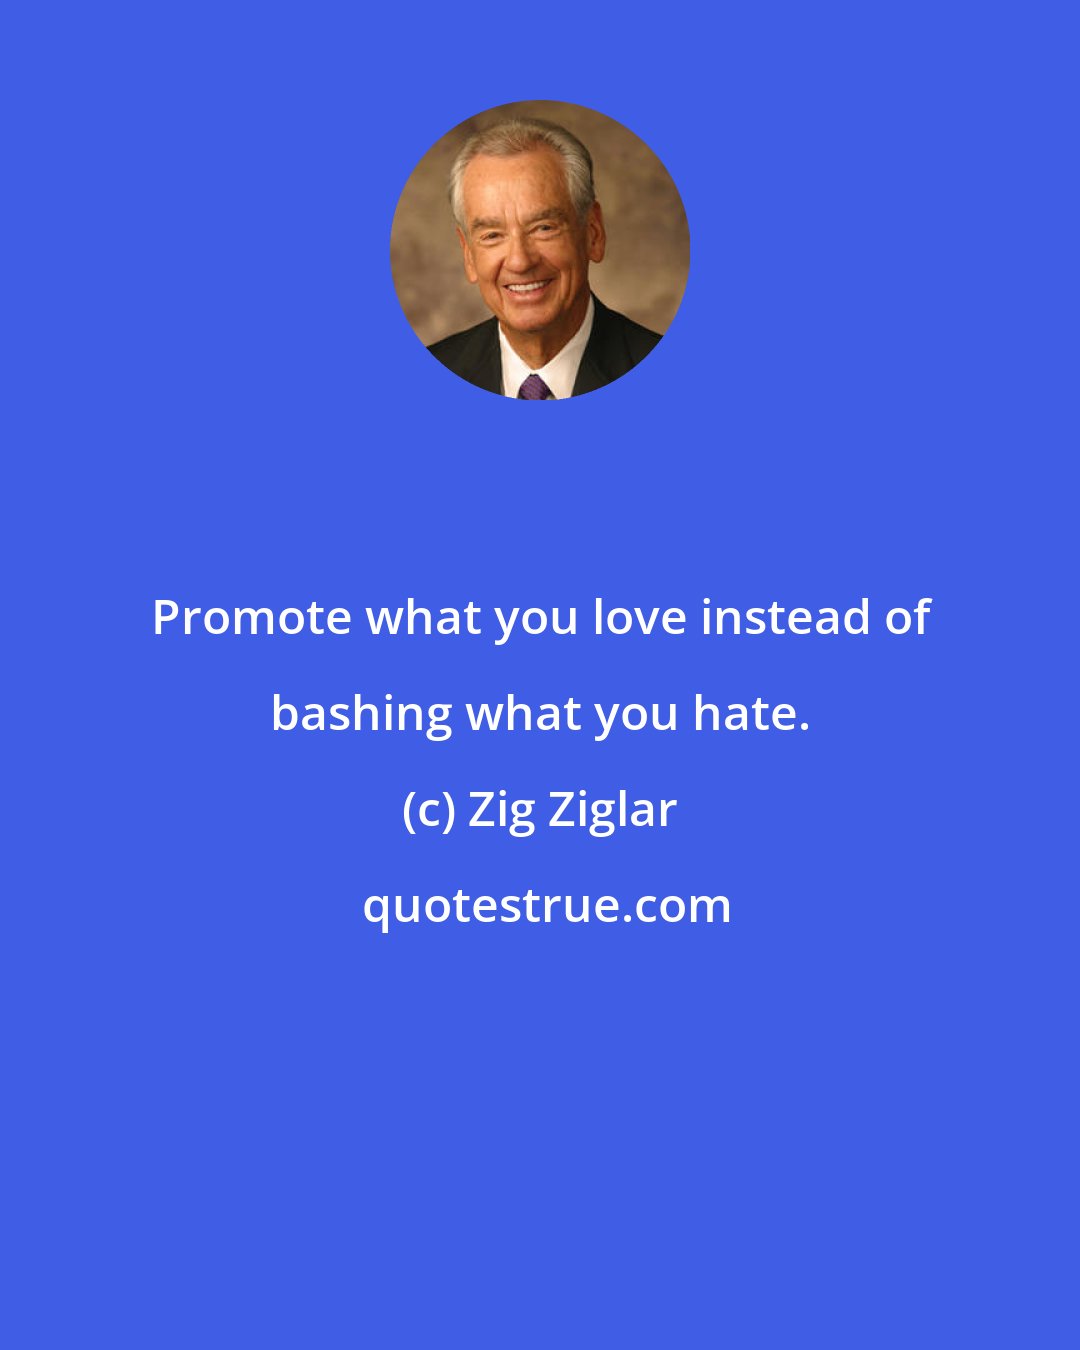 Zig Ziglar: Promote what you love instead of bashing what you hate.